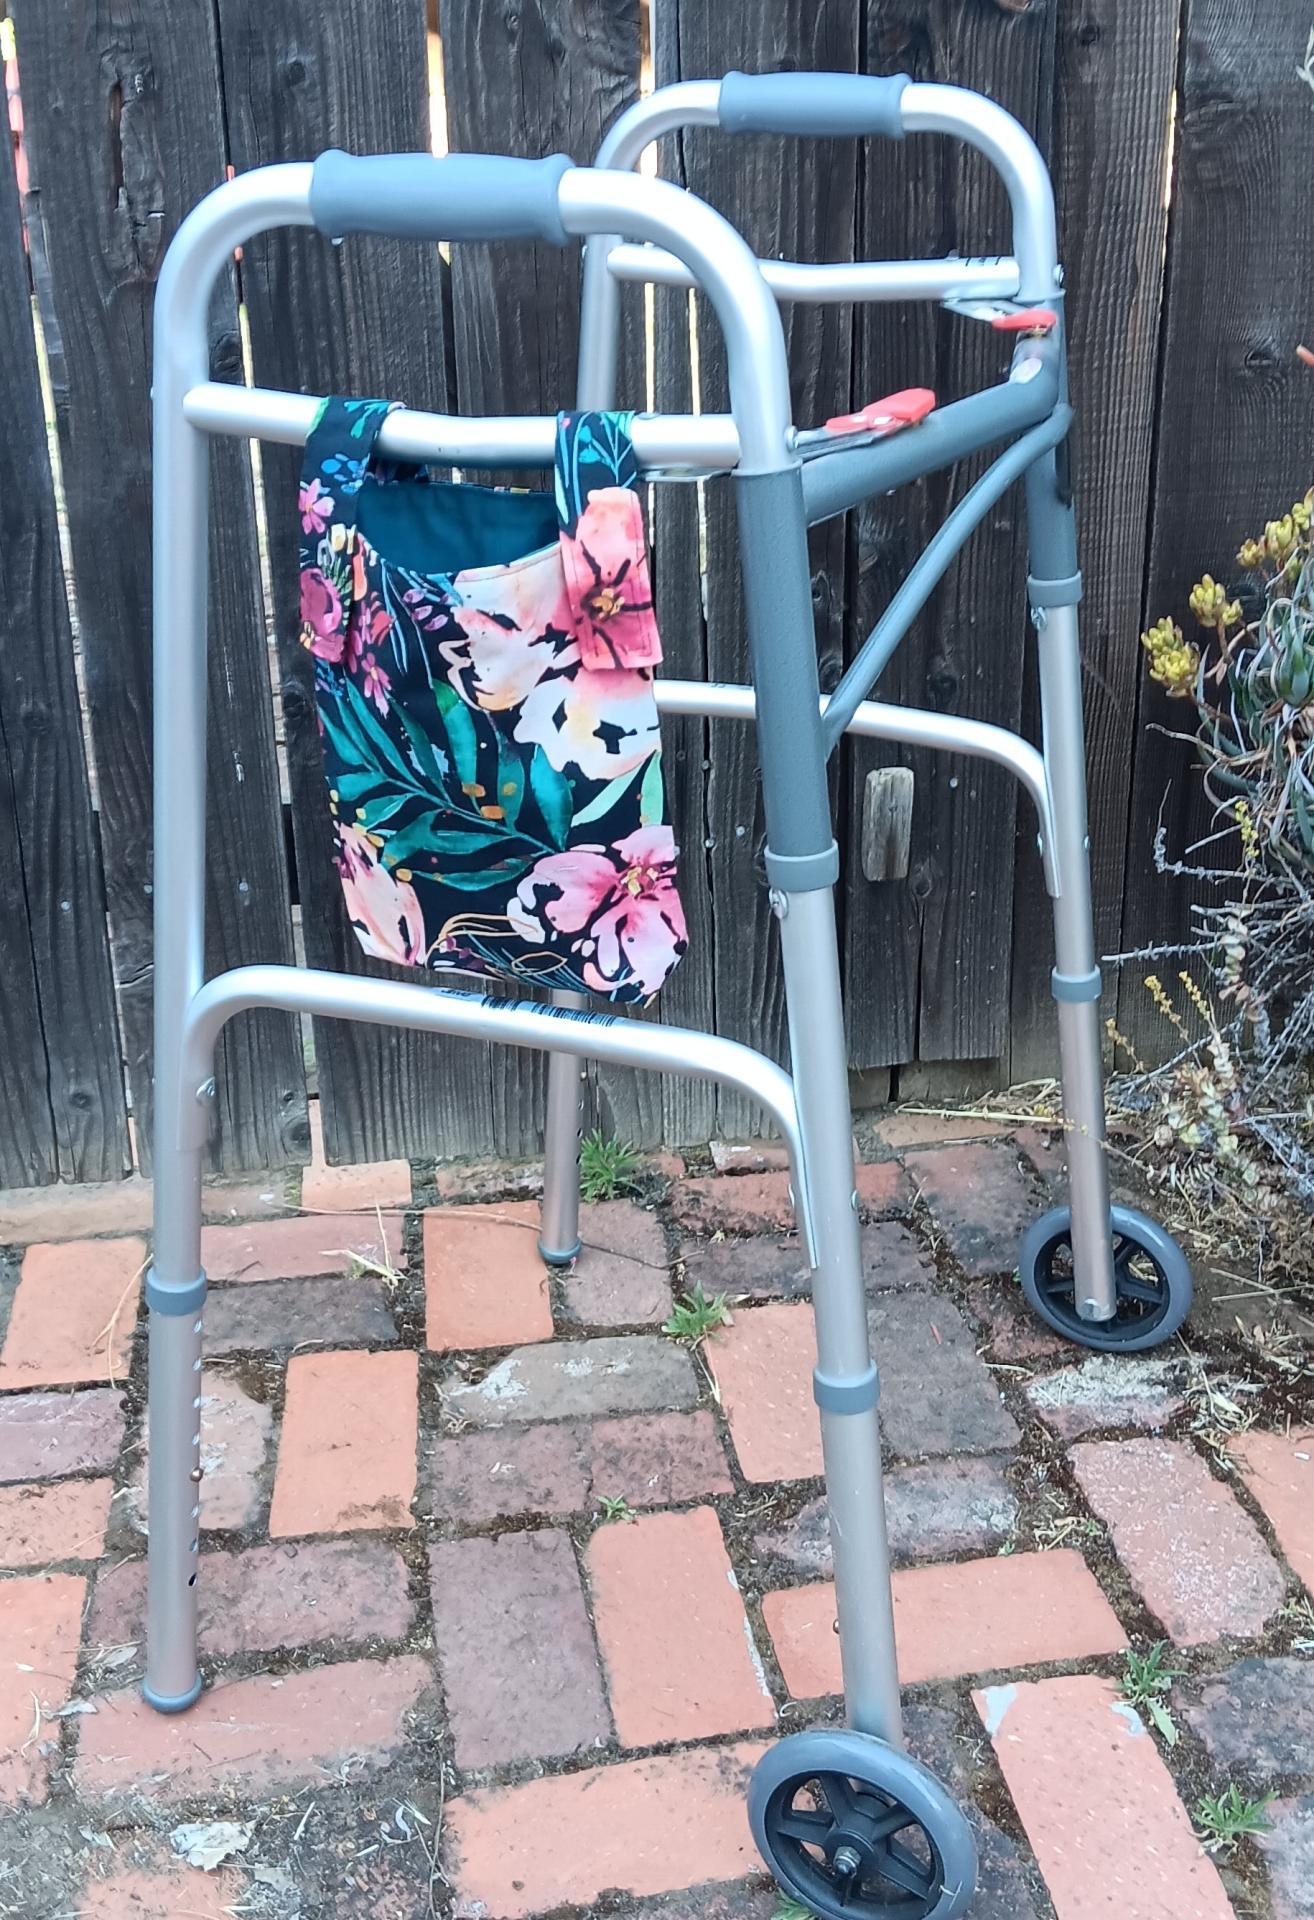 Simple small basic bag for crutch, walker, stroller, scooter handlebars, bed rail, caddy, hook and loop, fire flames fabric